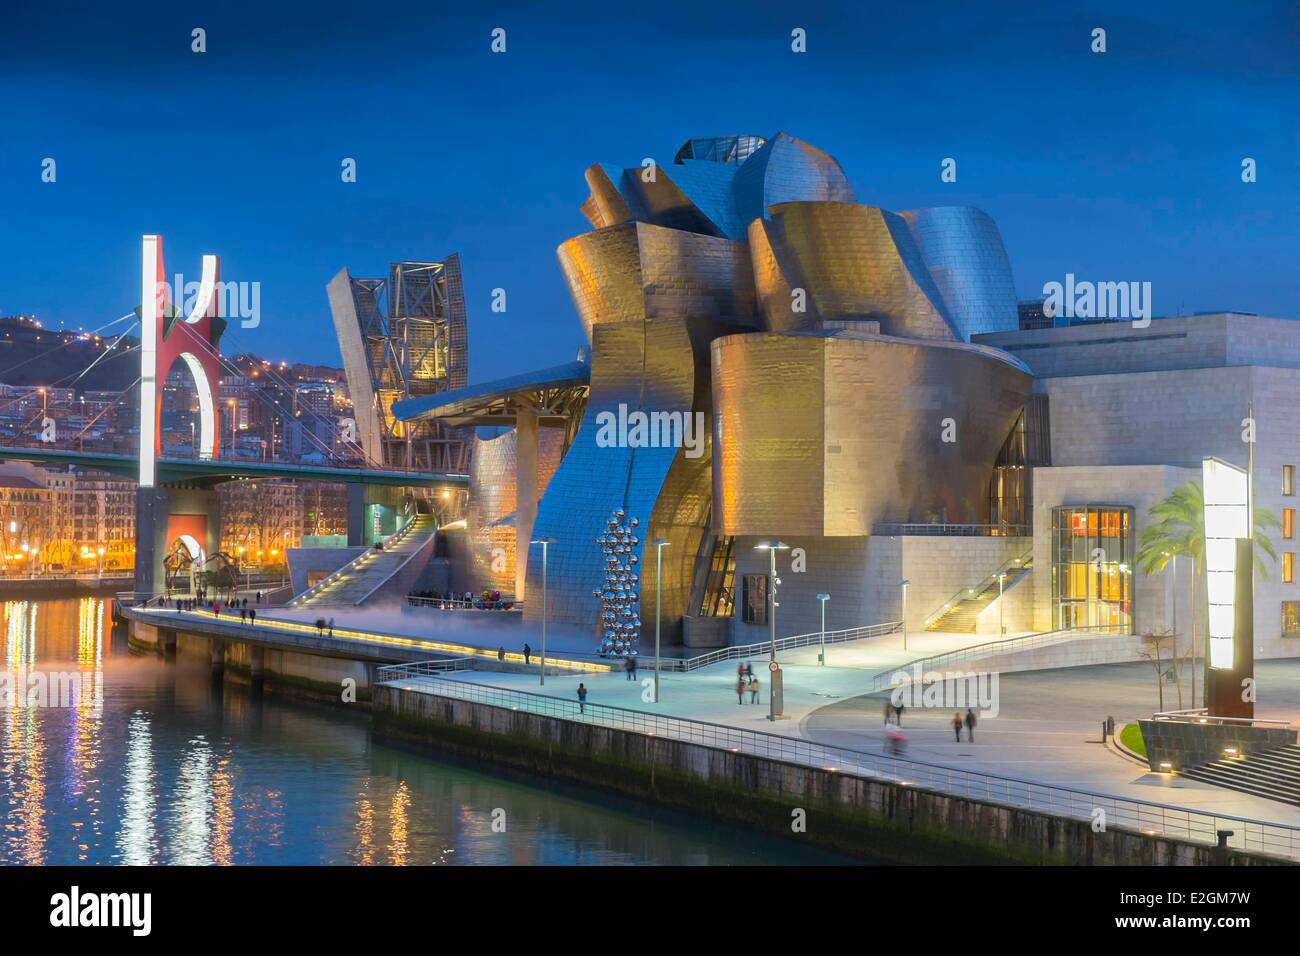 Spain Basque Country Region Vizcaya Province Bilbao Guggenheim Museum by architect Frank Gehry and Salve bridge with Les Arches Rouges artpiece by French artist Daniel Buren Stock Photo